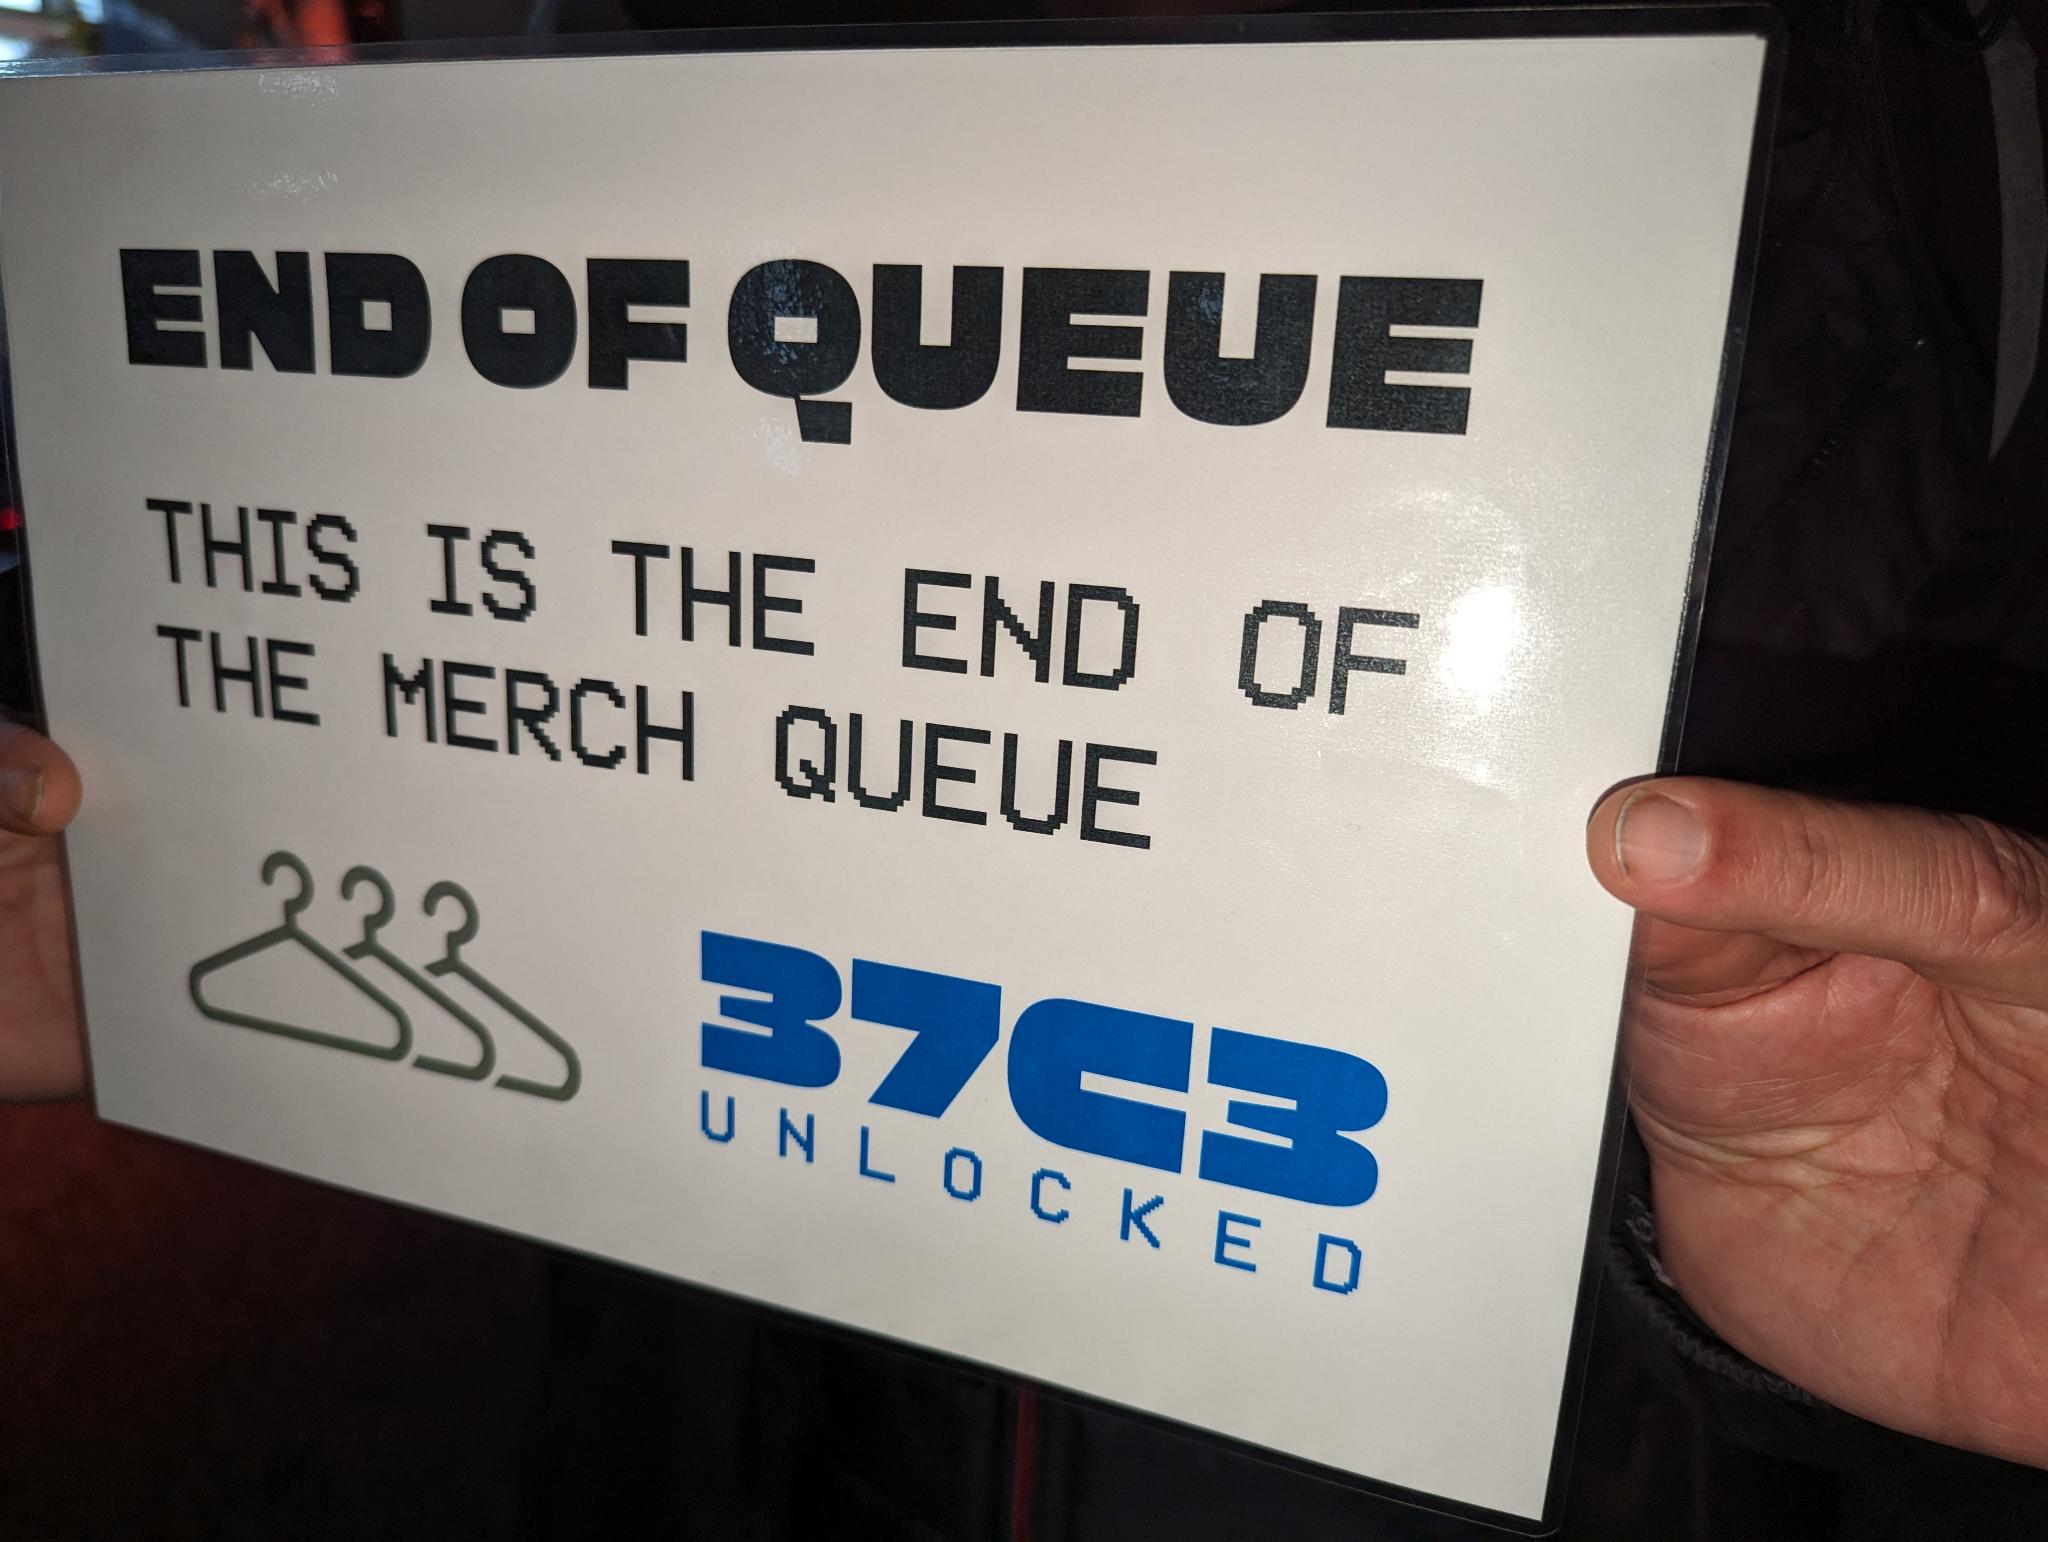 A sign titled "END OF QUEUE", with the description "THIS IS THE END OF THE MERCH QUEUE"